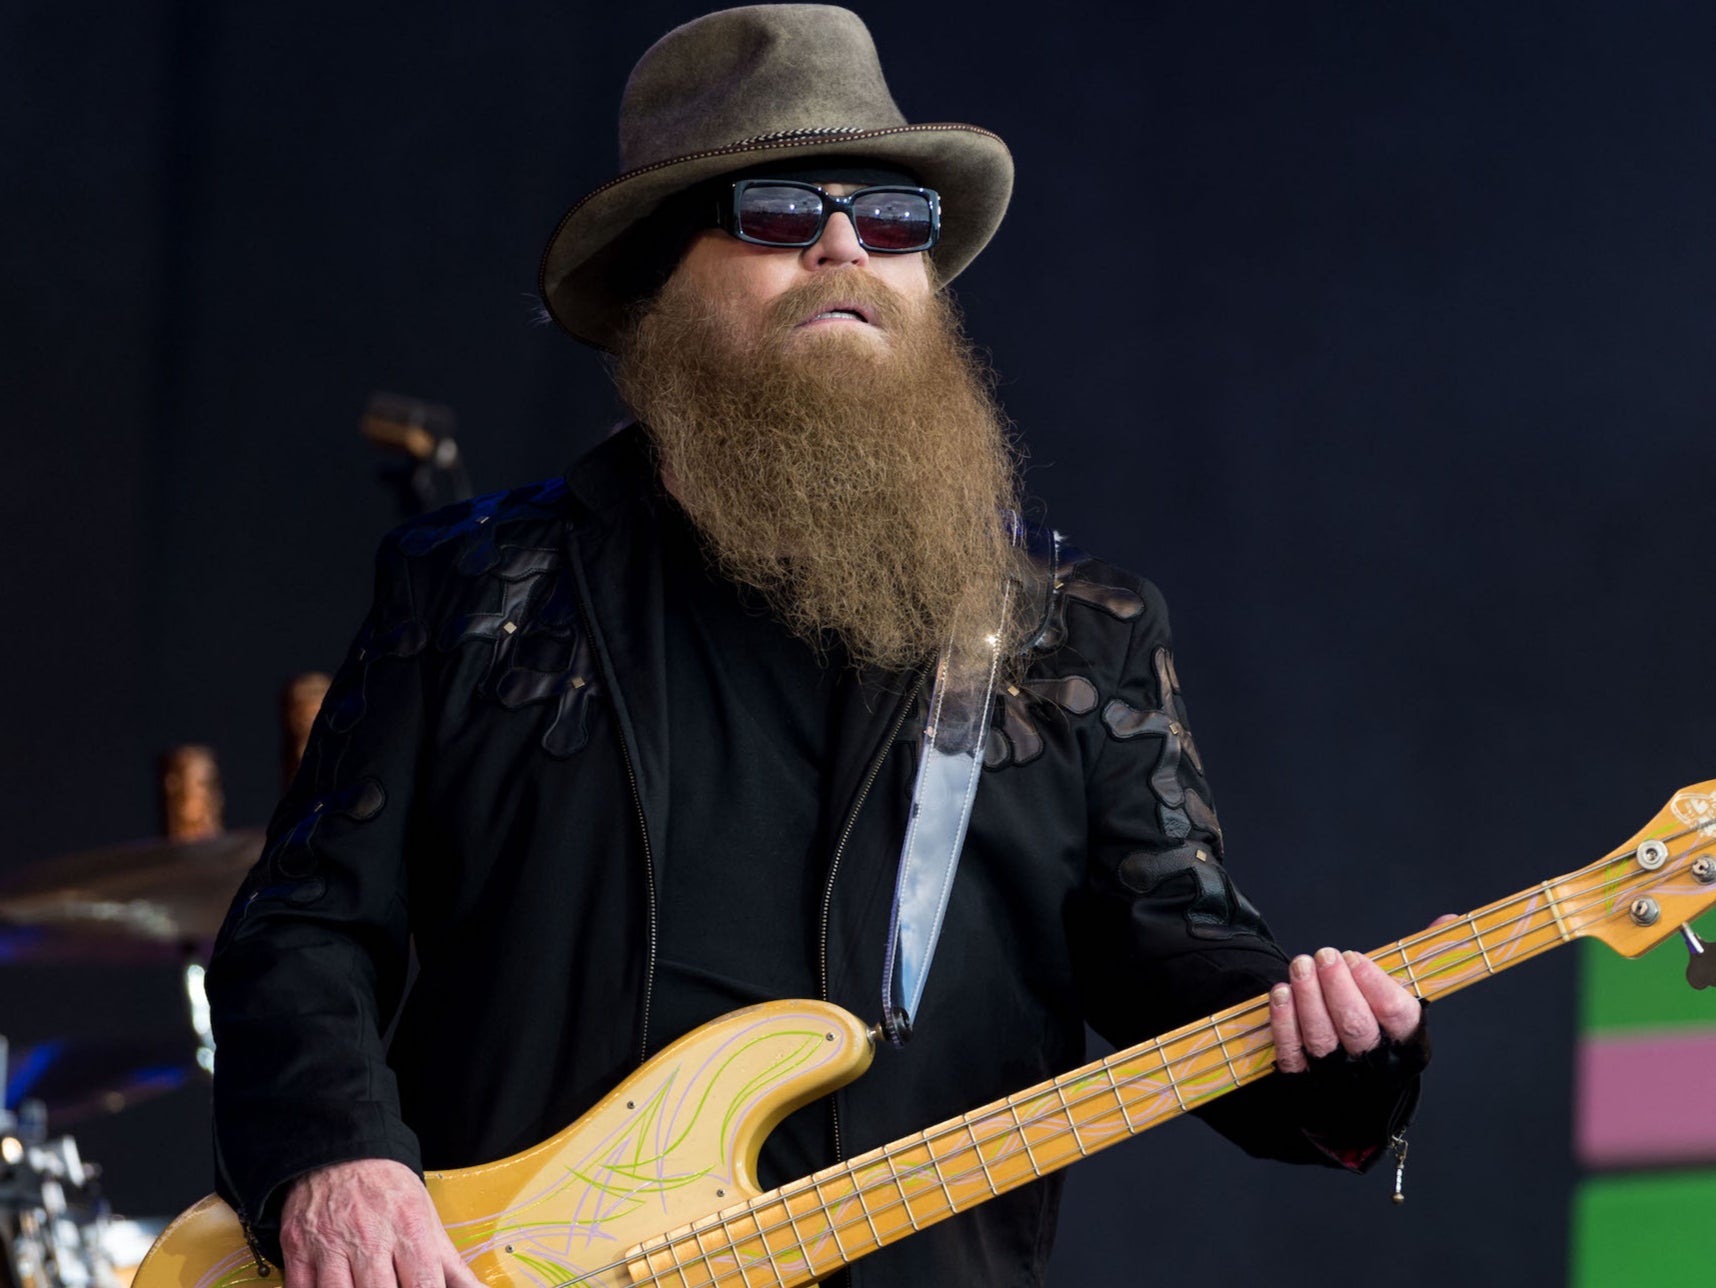 Dusty Hill performs on the Pyramid Stage during the 2016 Glastonbury Festival